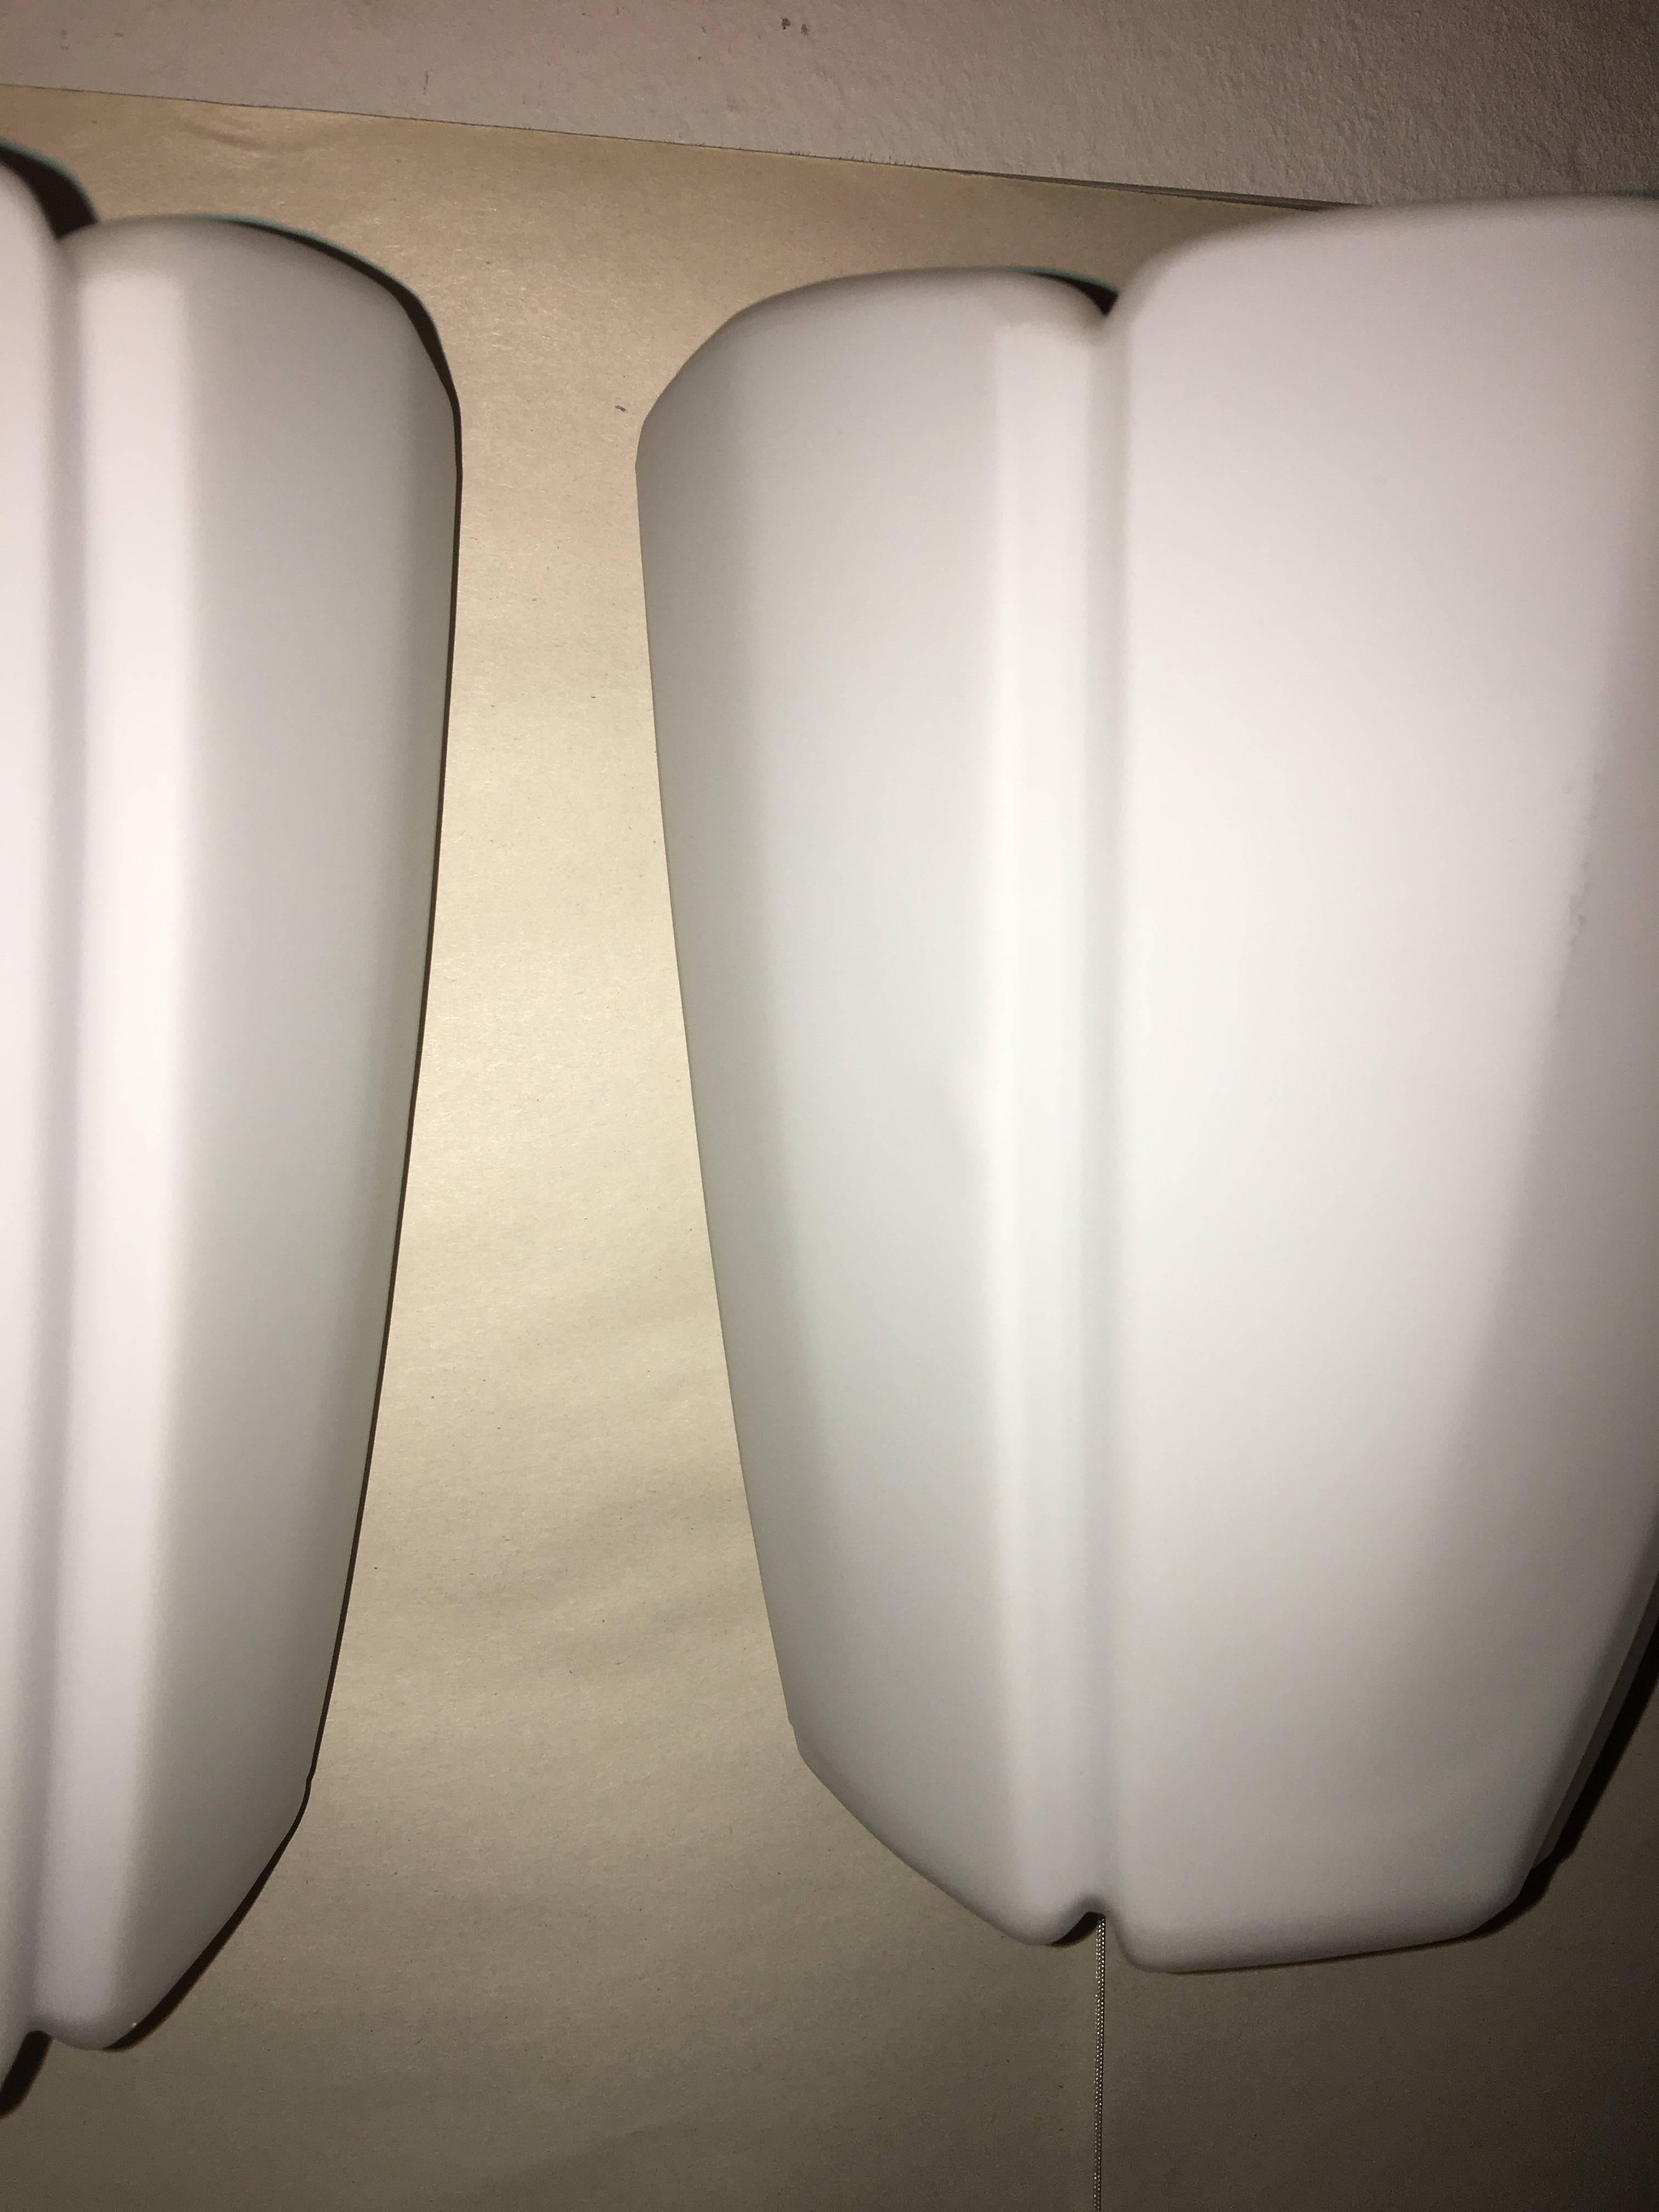 Pair of 1960s Milk Glass Sconces by Limburg Germany - 2 pair available For Sale 2